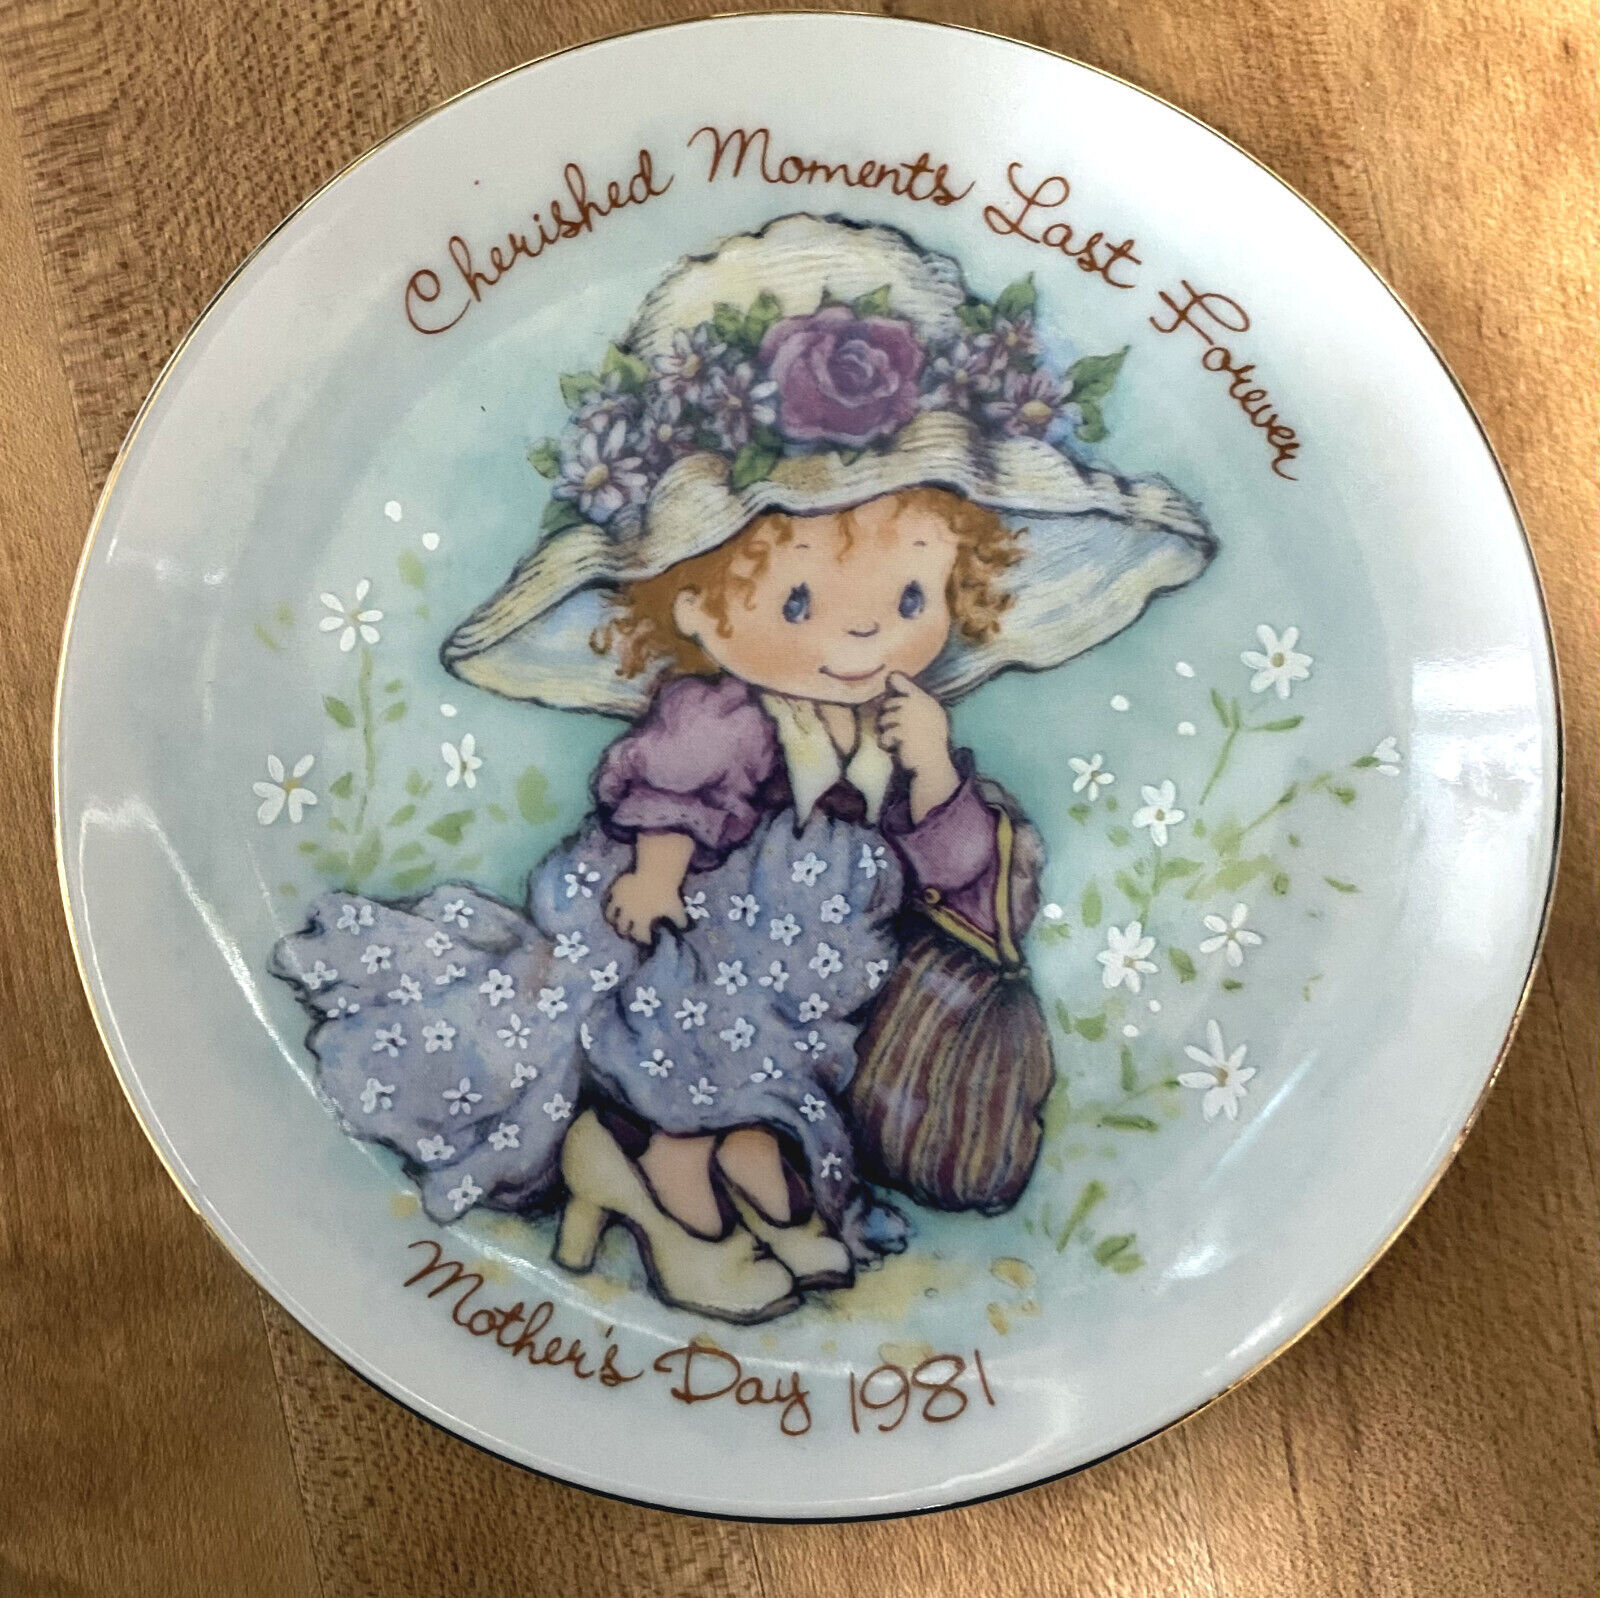 Avon Mothers Day Collector Plate 1981 - Cherished Moments - Vintage